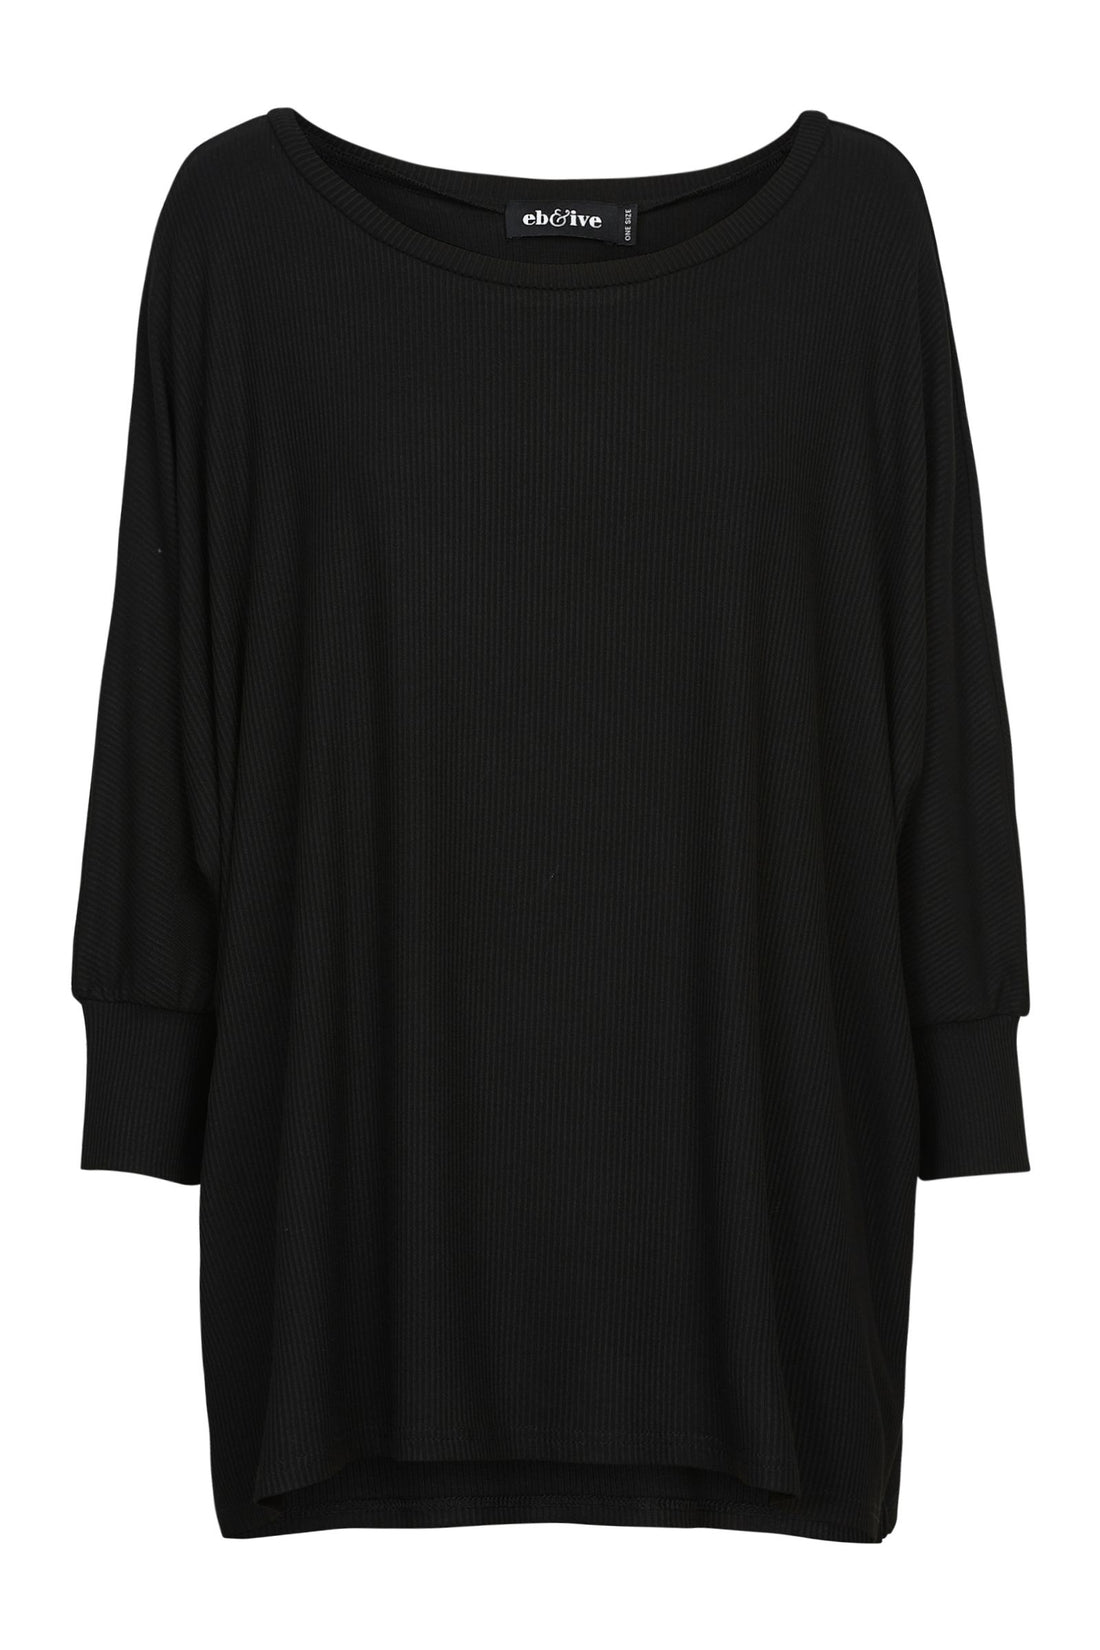 Eb &amp; Ive Black Ribbed Top - One Size